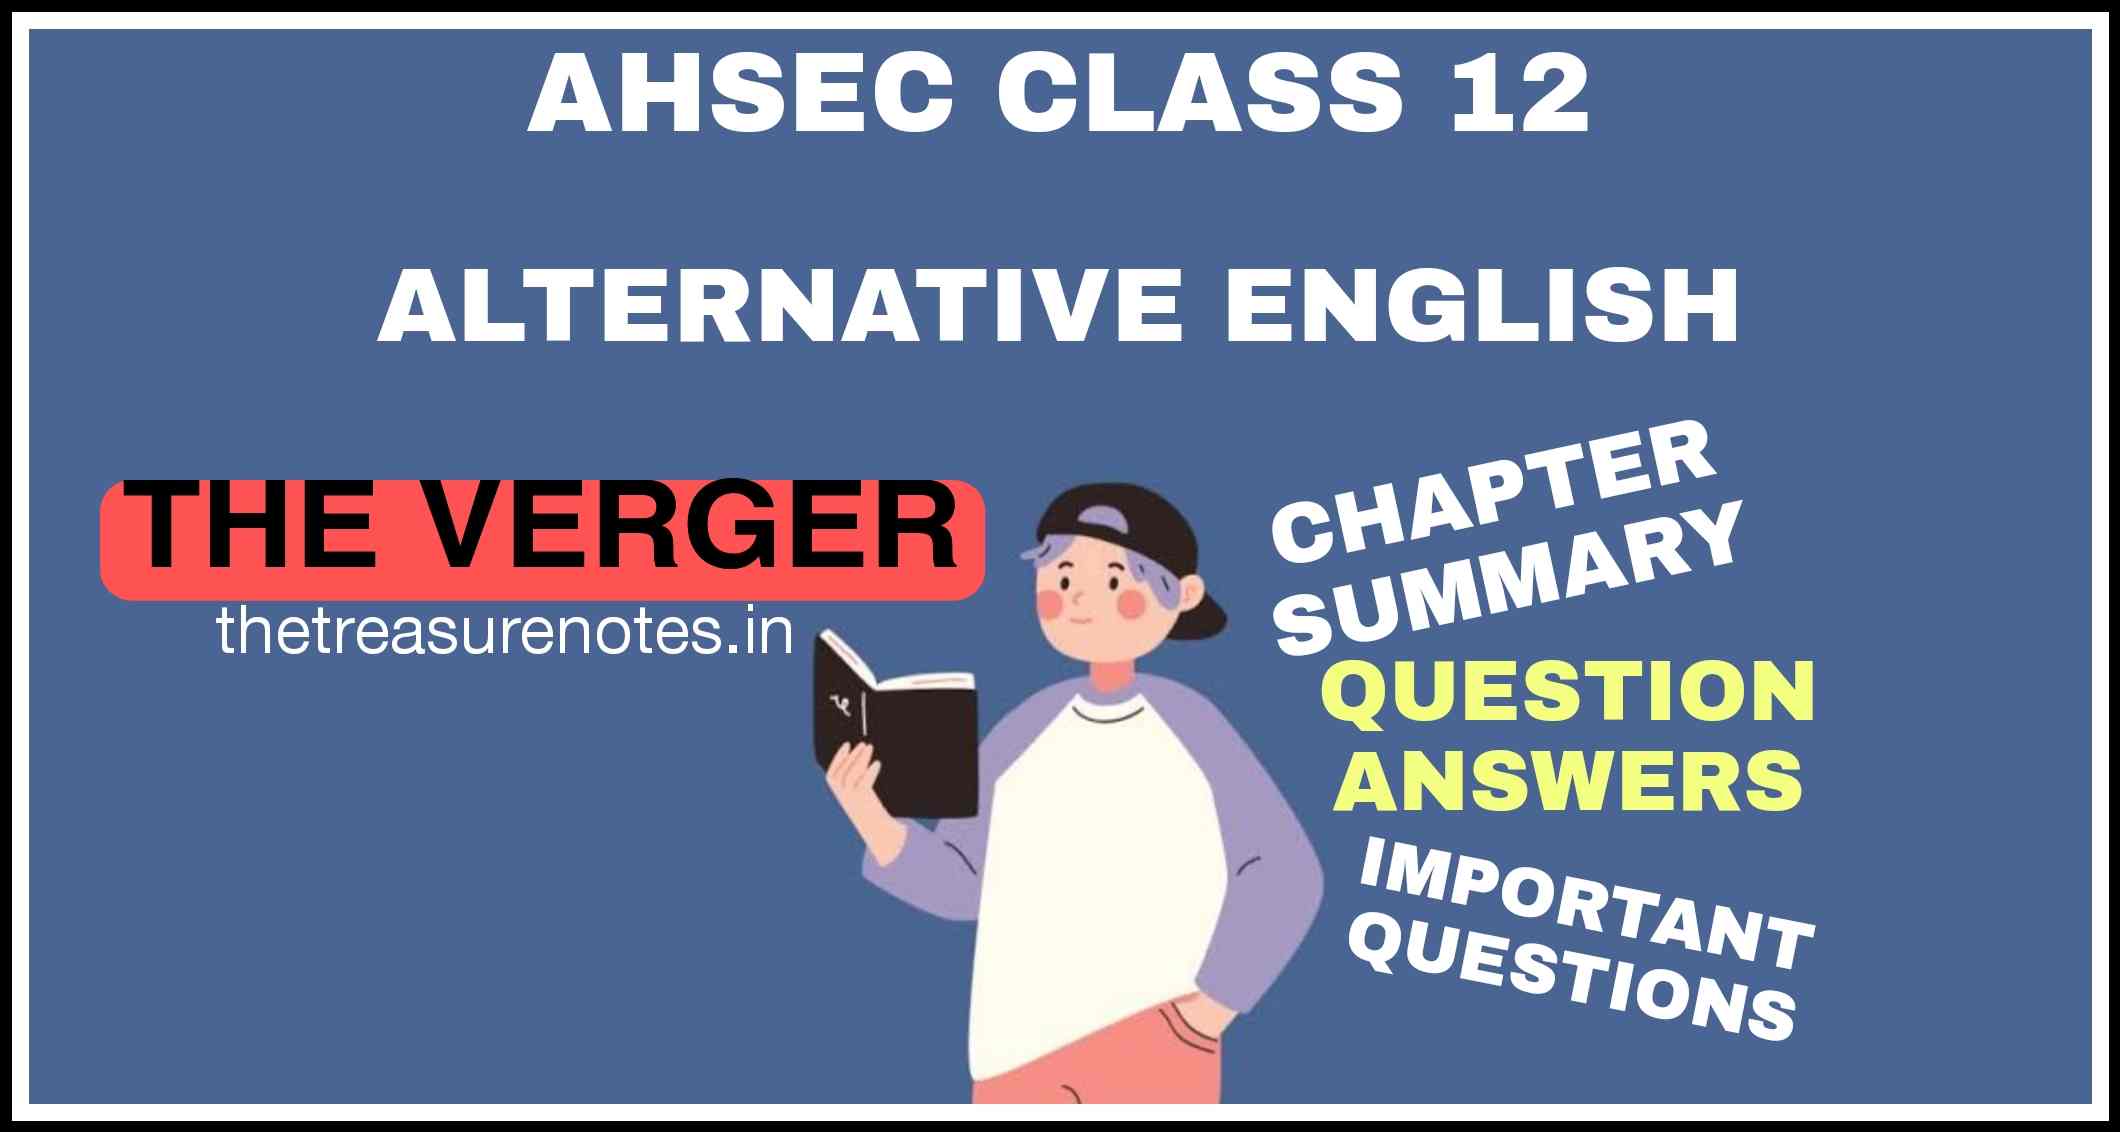 The Verger Questions Answers Class 12 Summary AHSEC